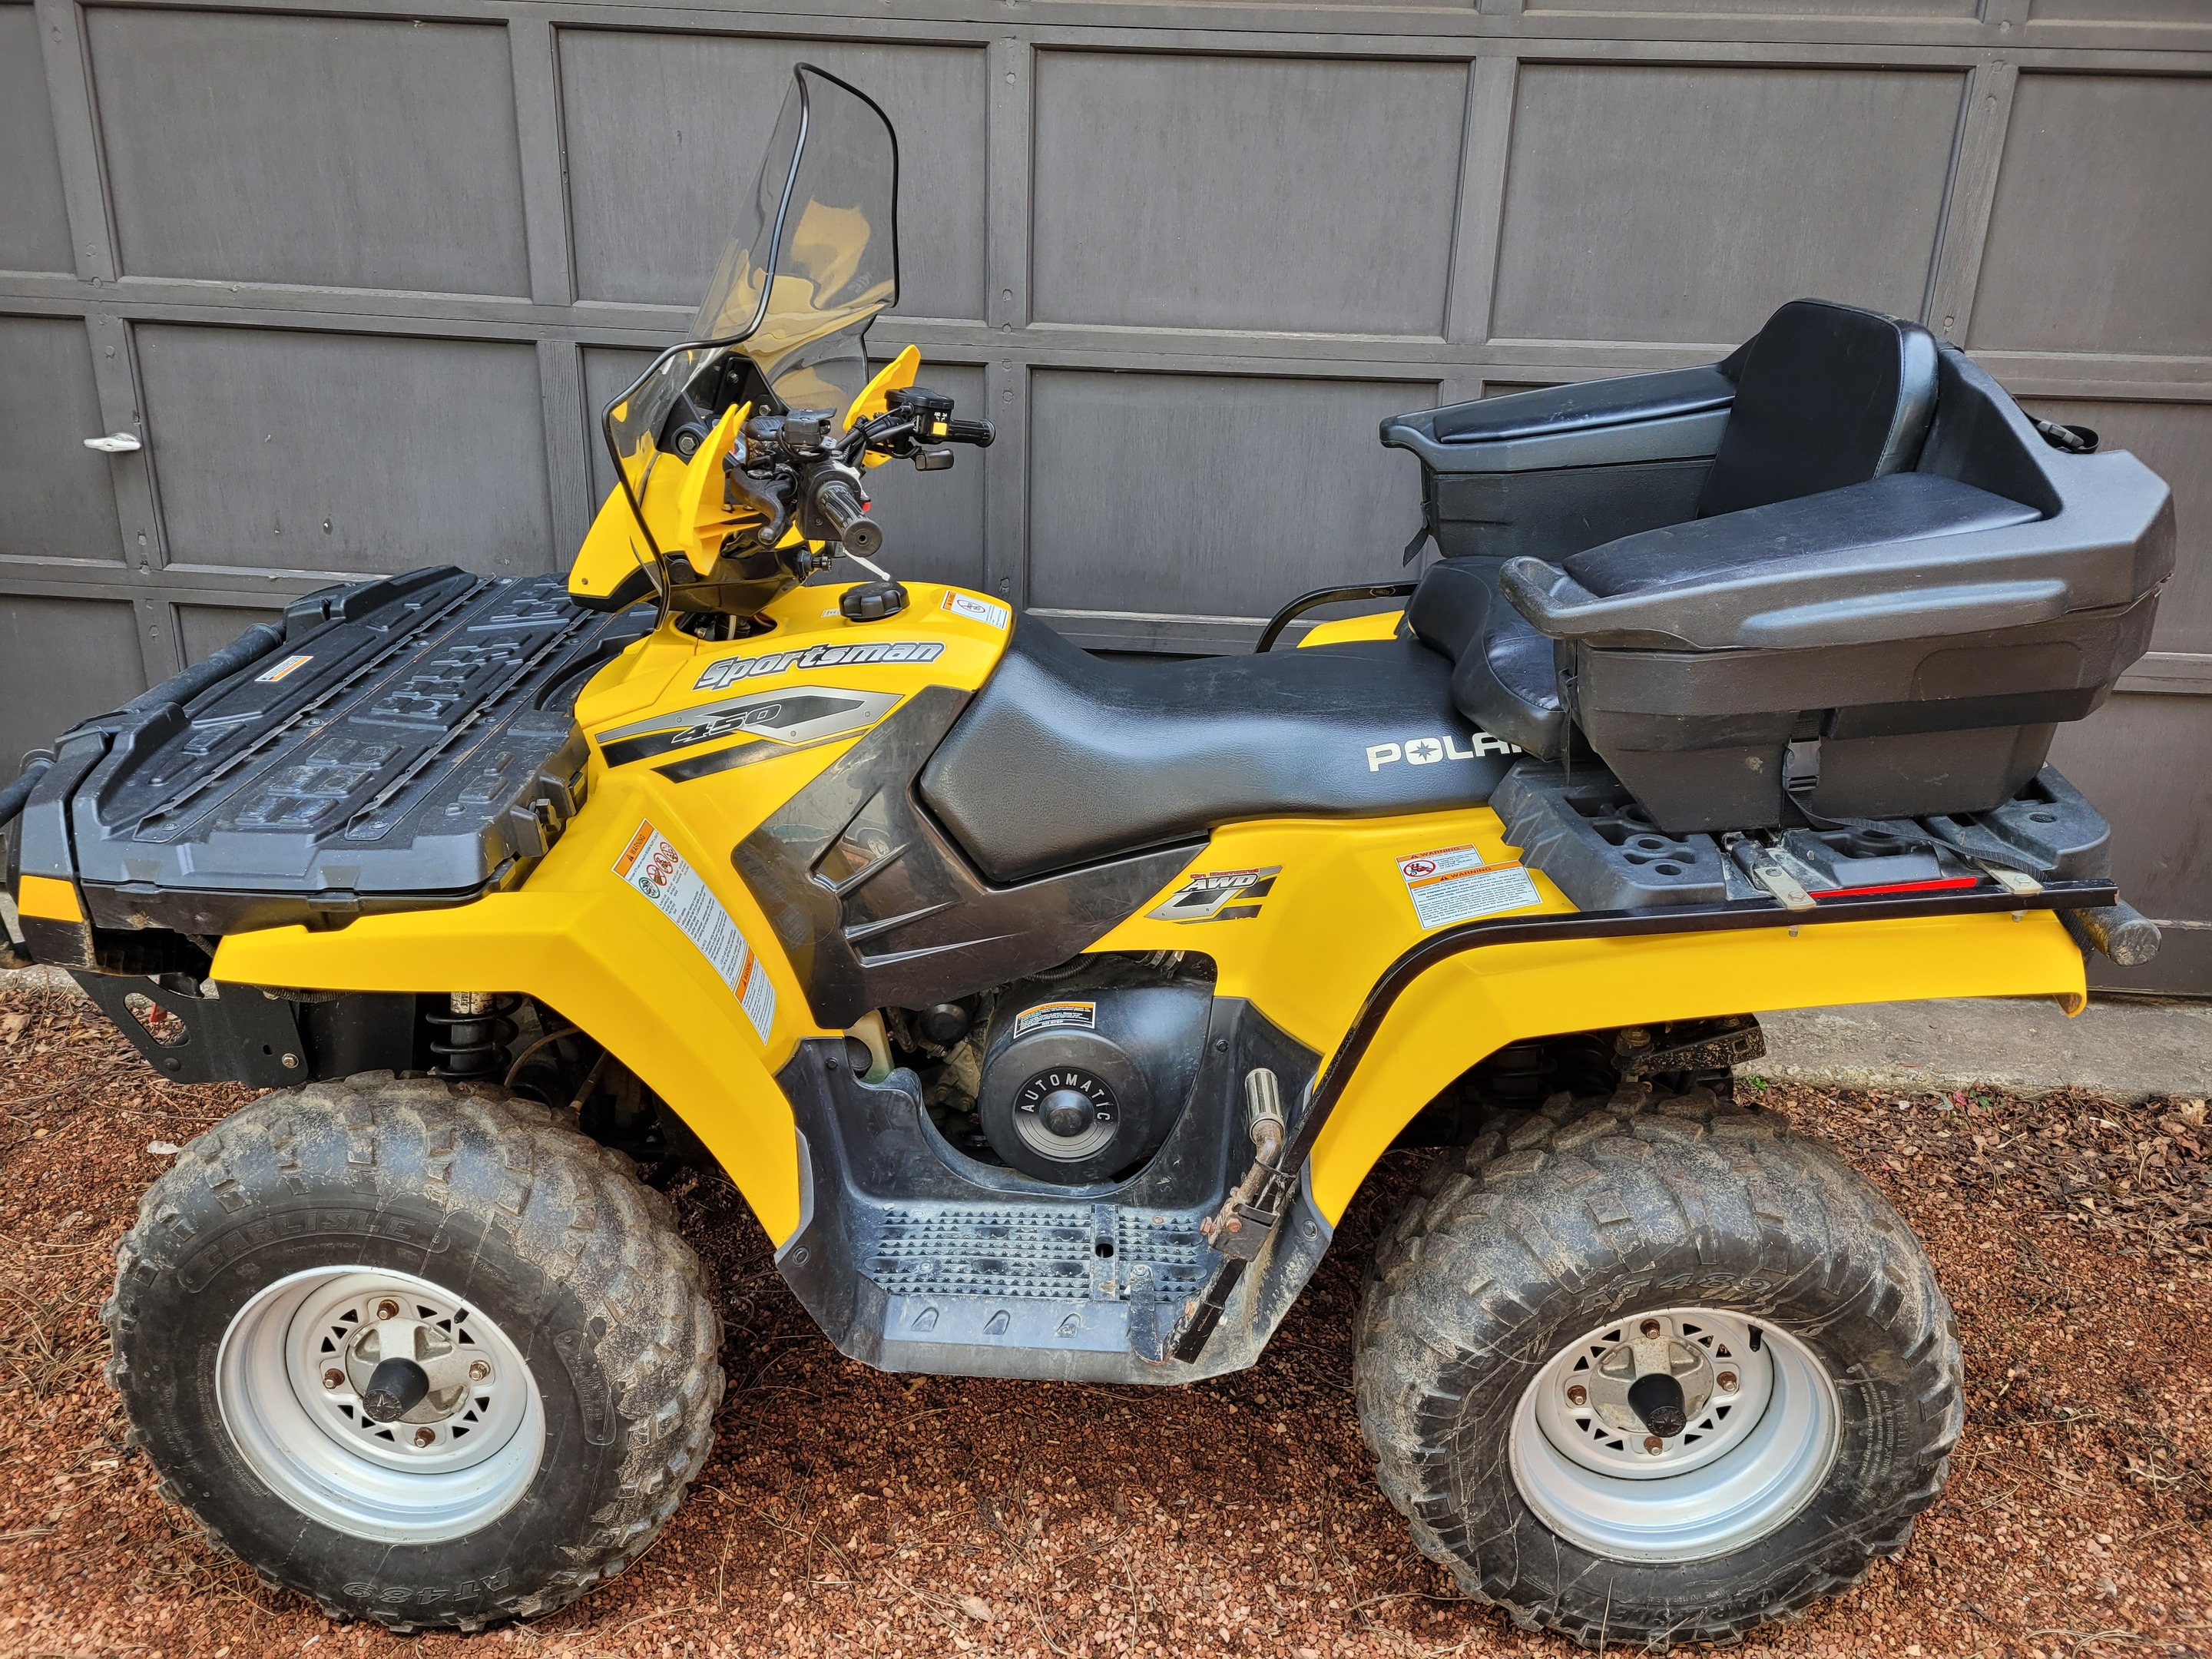 2006 Polaris Sportsman 450 High Output 1-Owner Financing Available & Trade-ins Welcome!